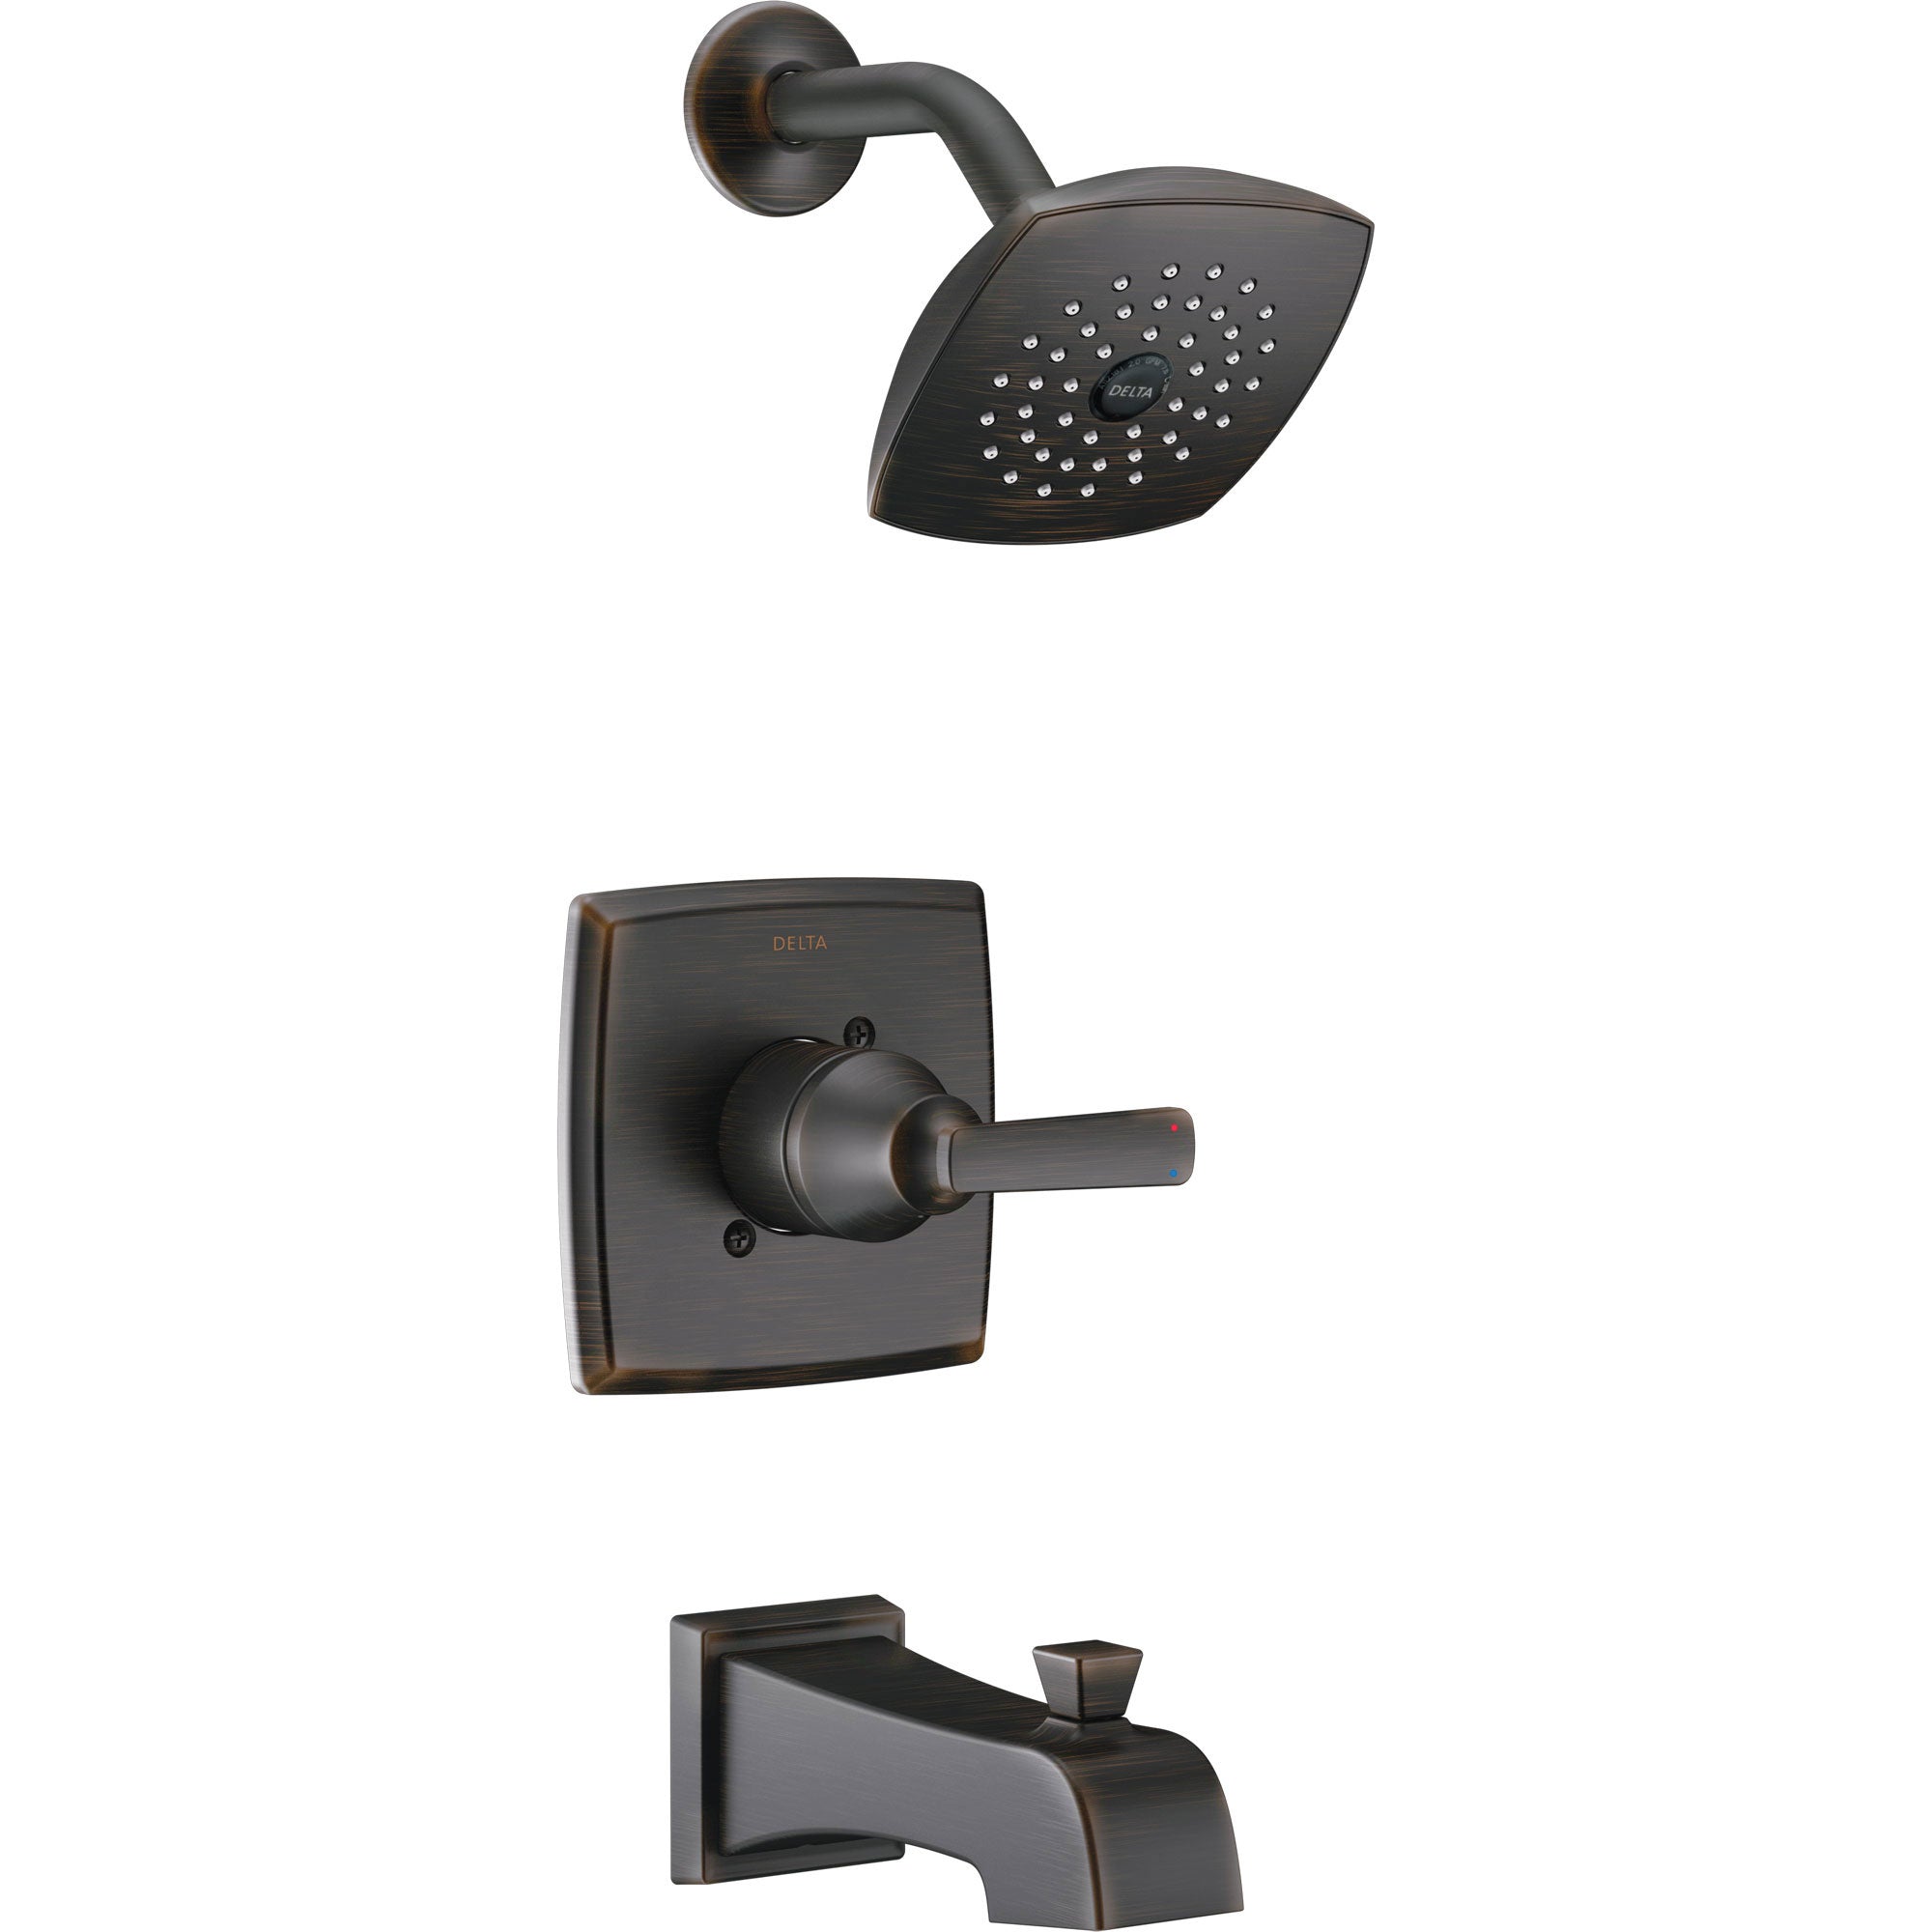 Delta Ashlyn Modern Venetian Bronze Finish 14 Series Watersense Single Handle Tub and Shower Combination Faucet INCLUDES Rough-in Valve with Stops D1173V